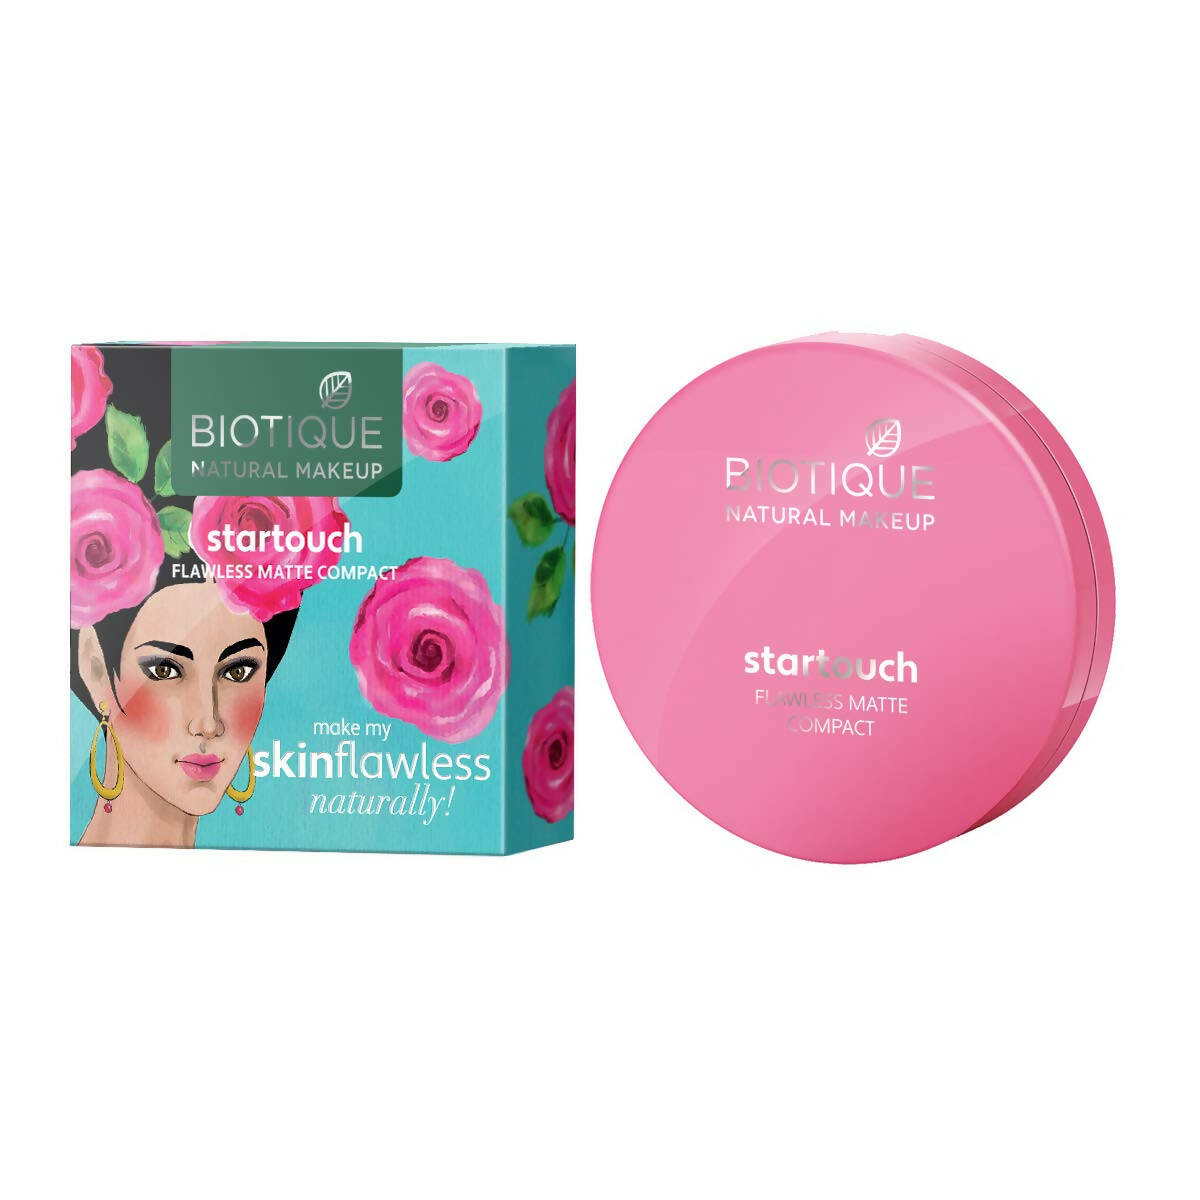 Biotique Natural Makeup Startouch Flawless Matte Compact - Tawny Nutmeg - Distacart